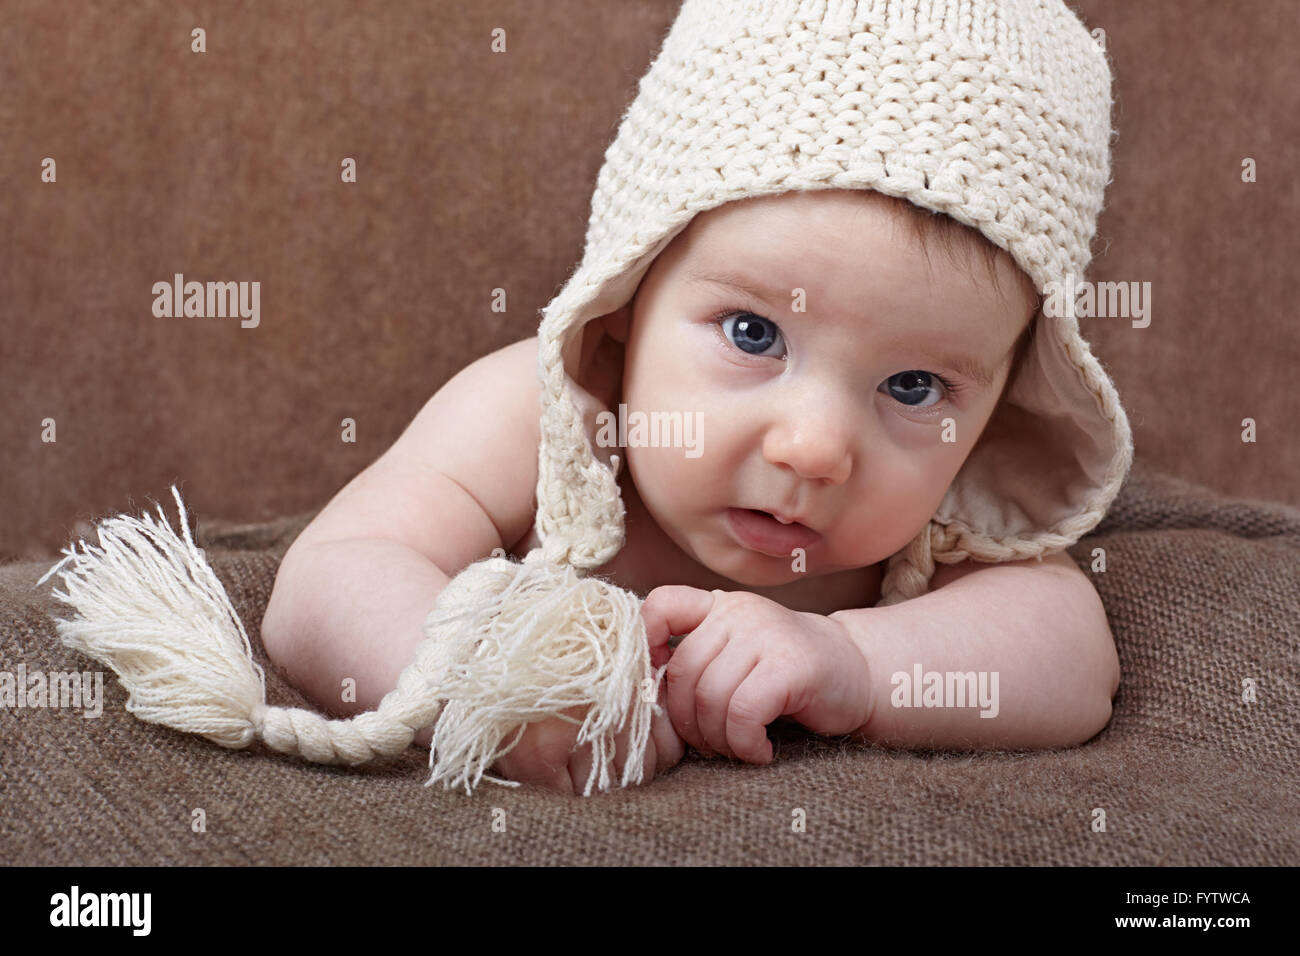 Portrait of a baby in a knitted cap Stock Photo